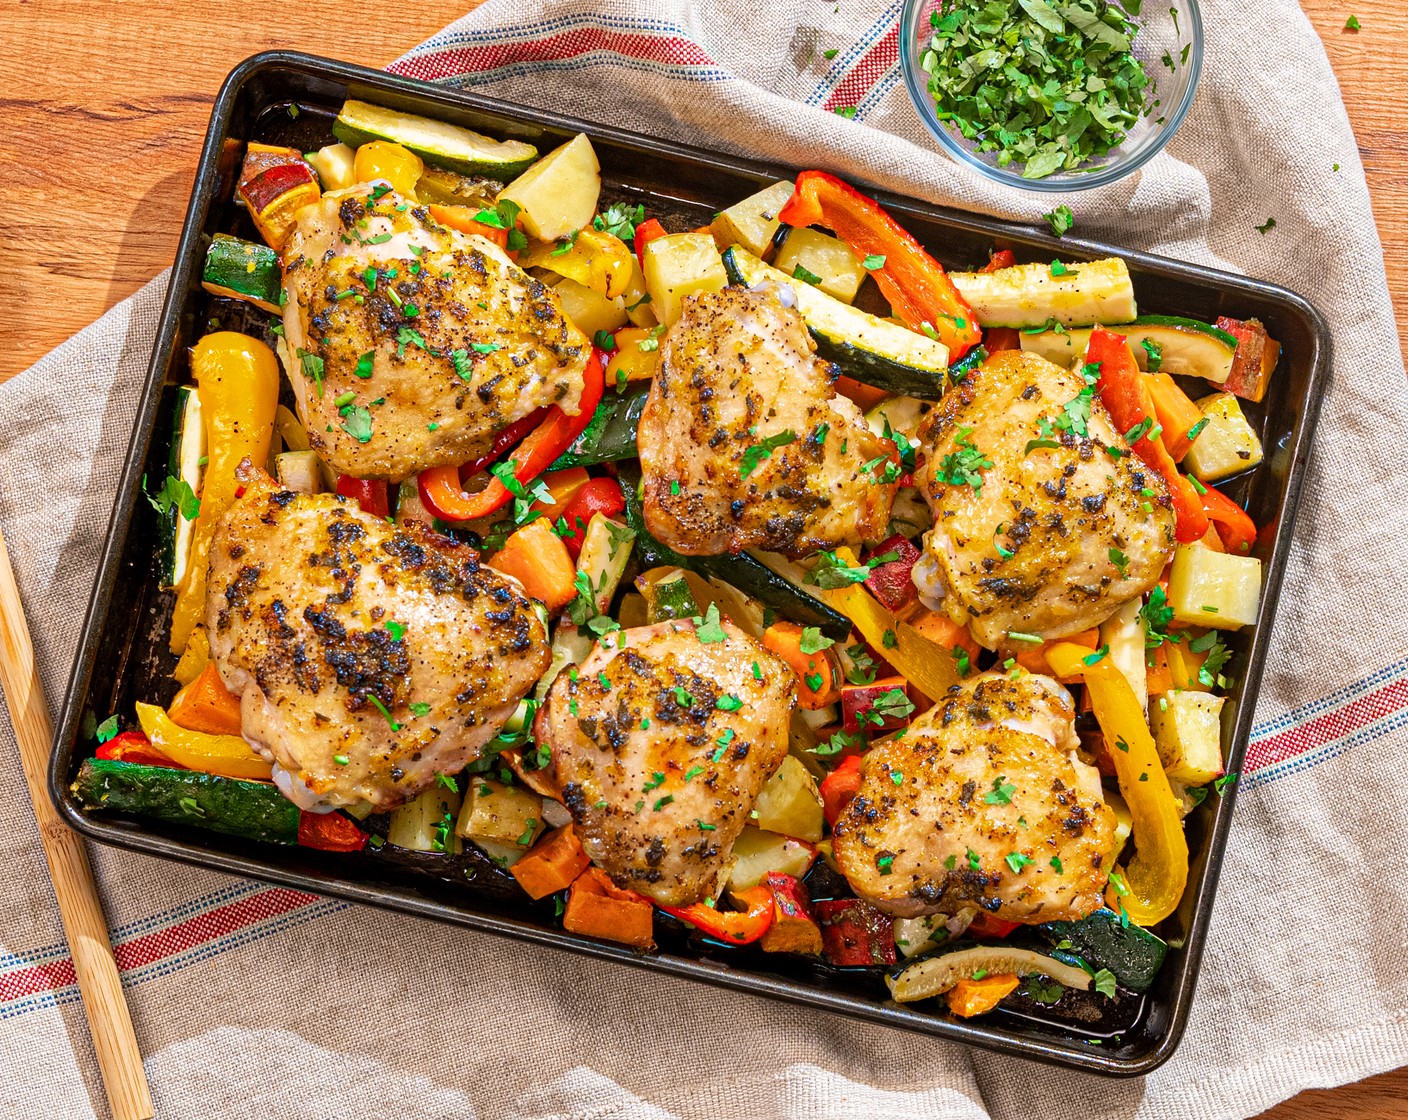 Lemon Butter Sheet Pan Chicken with Roasted Vegetables